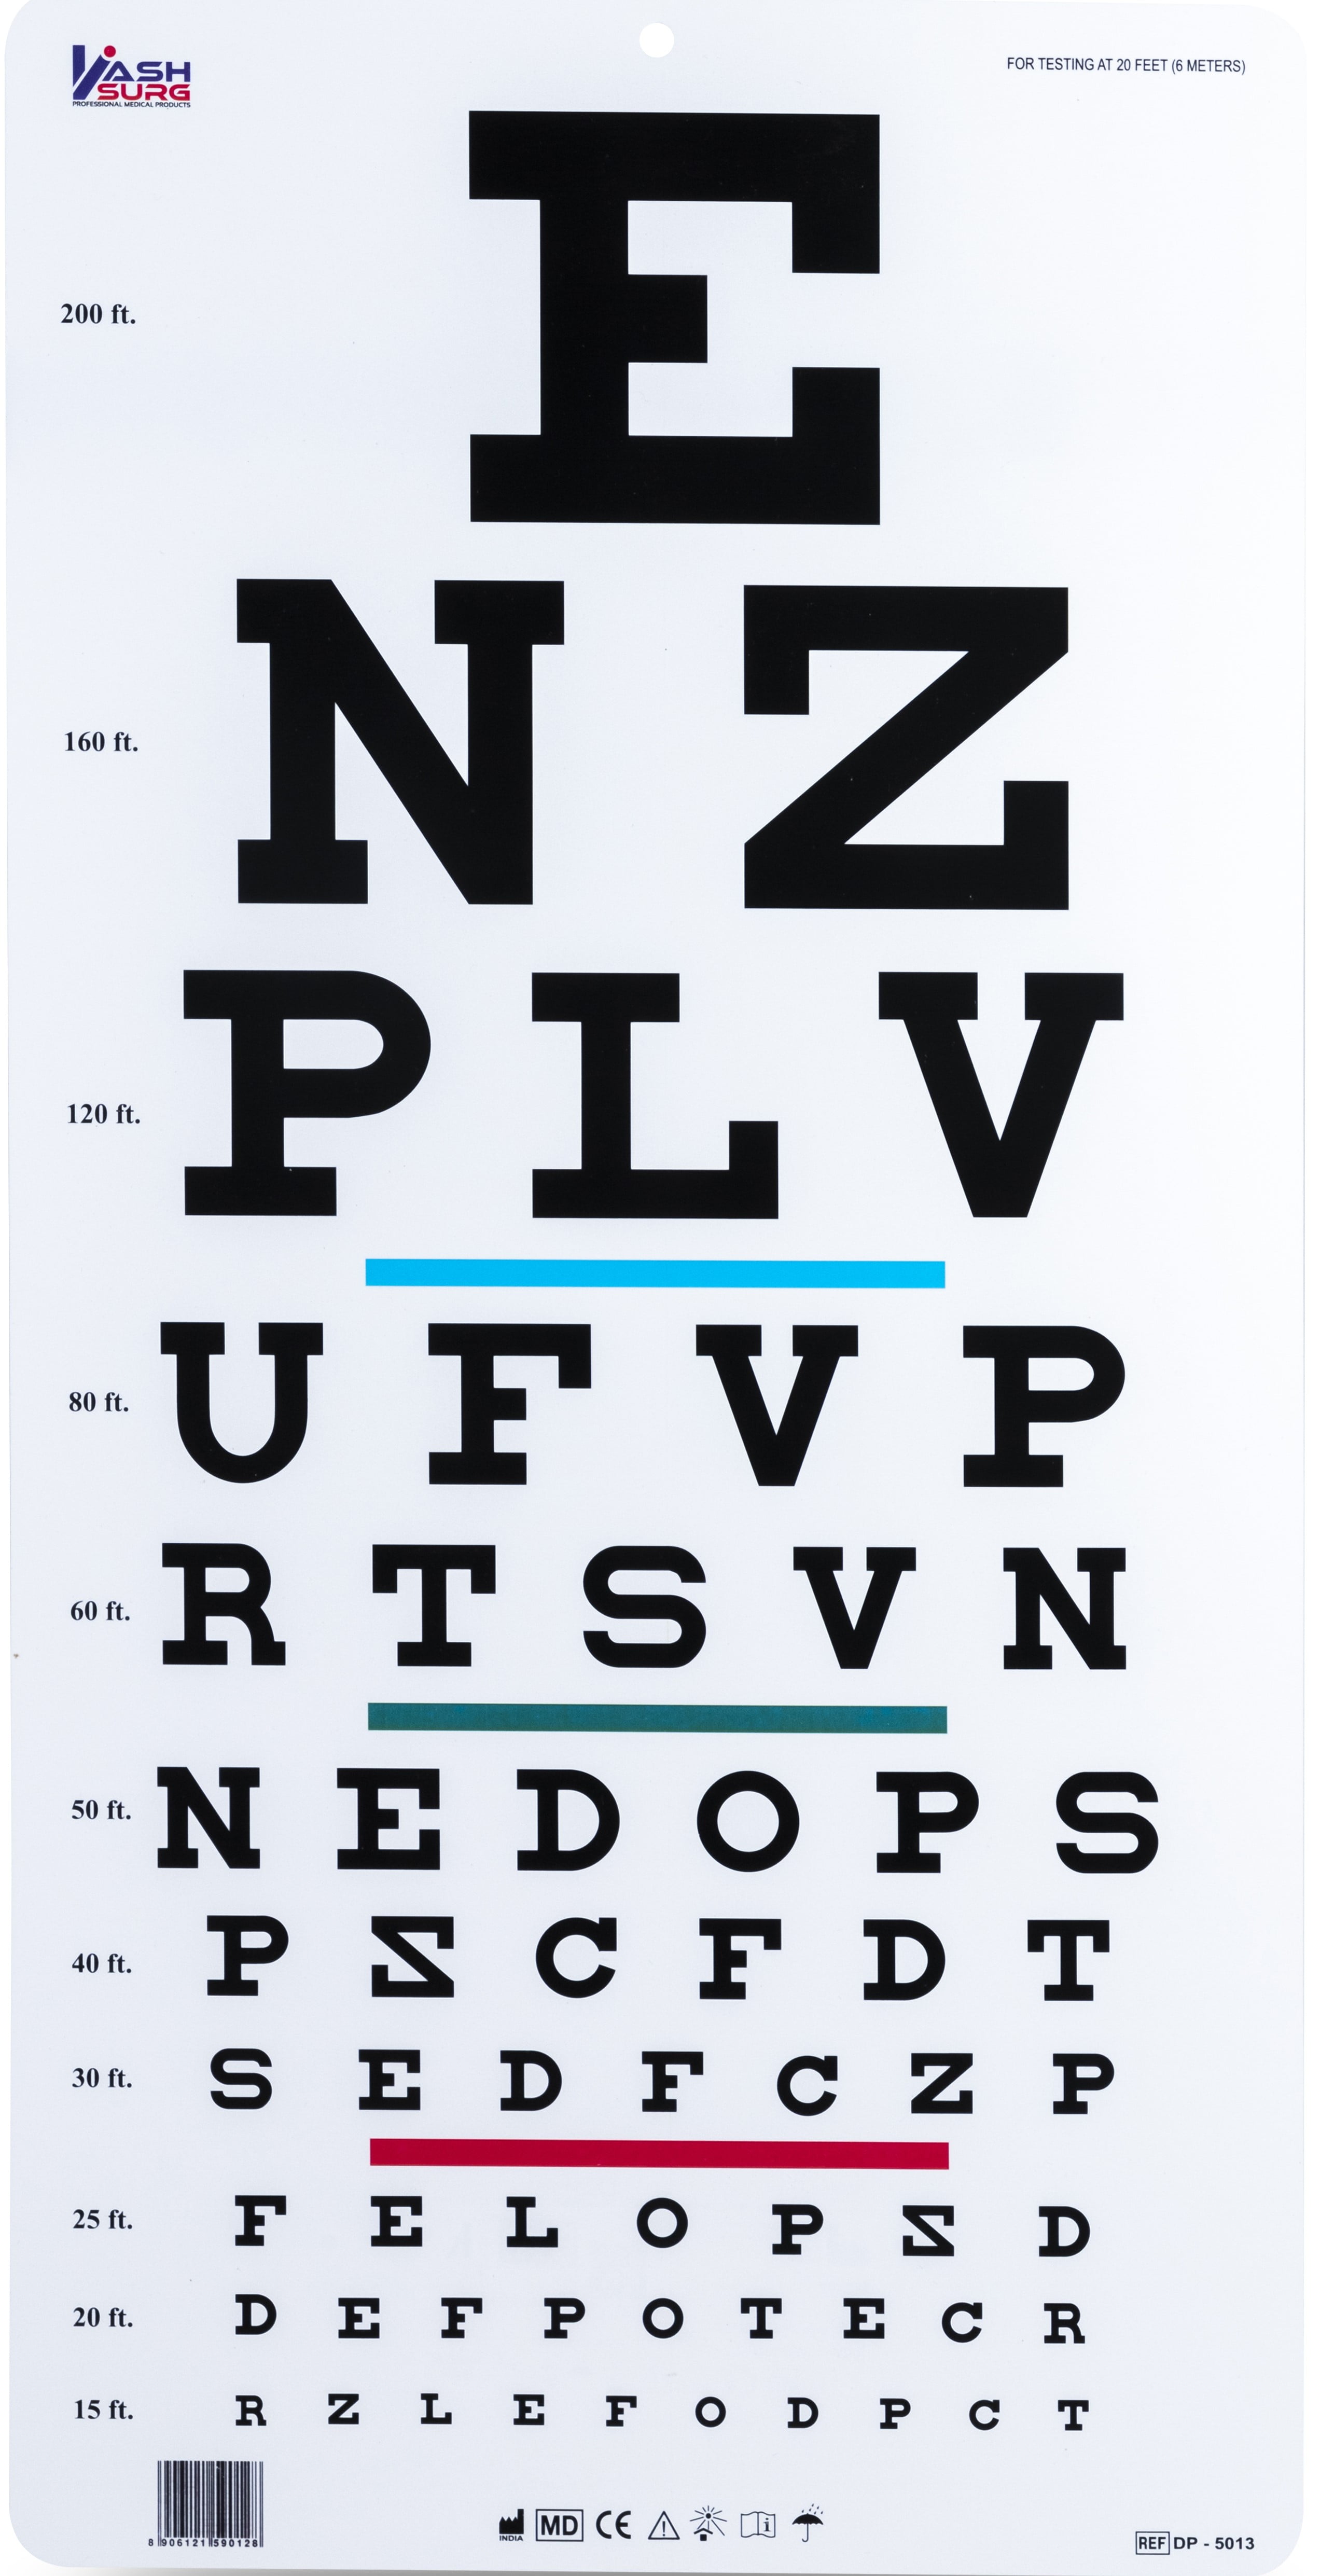 Snellen Eye Chart for Visual Acuity and Color Vision Test - A-Z Bookstore